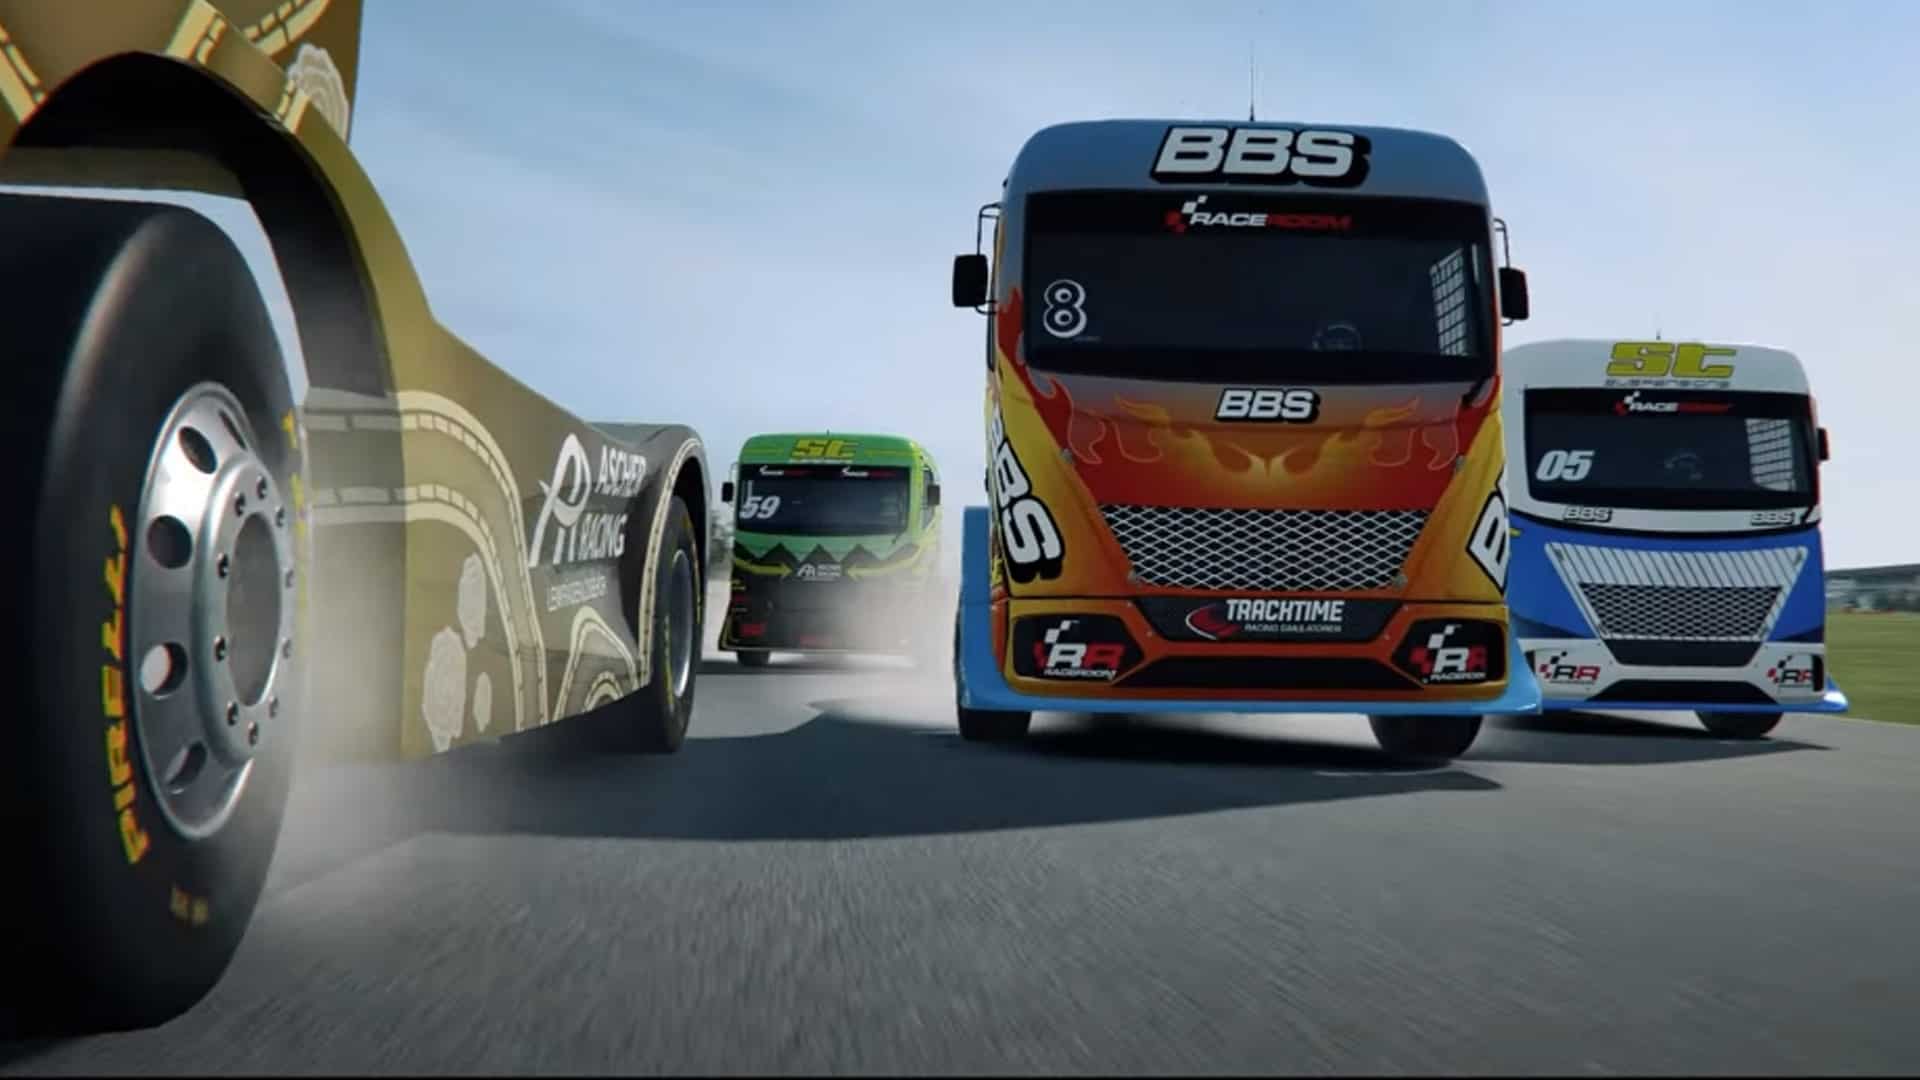 RaceRoom's simulation racing trucks are now available